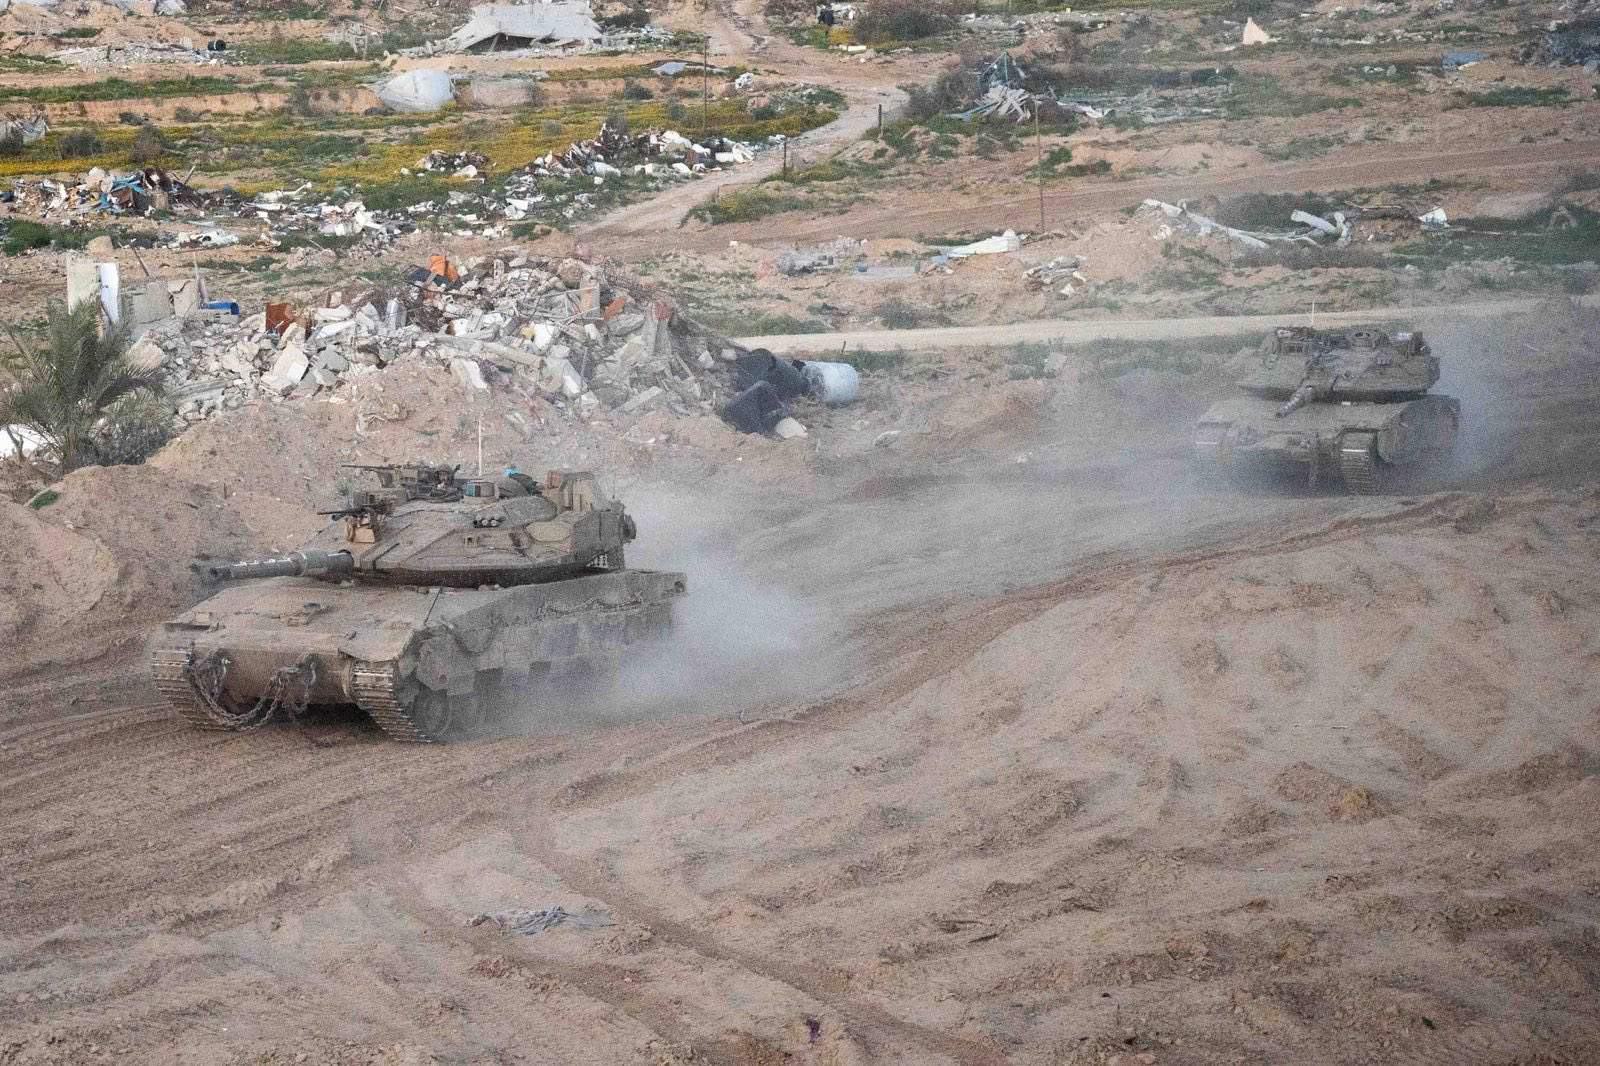 Israel assures Washington US arms to be used lawfully